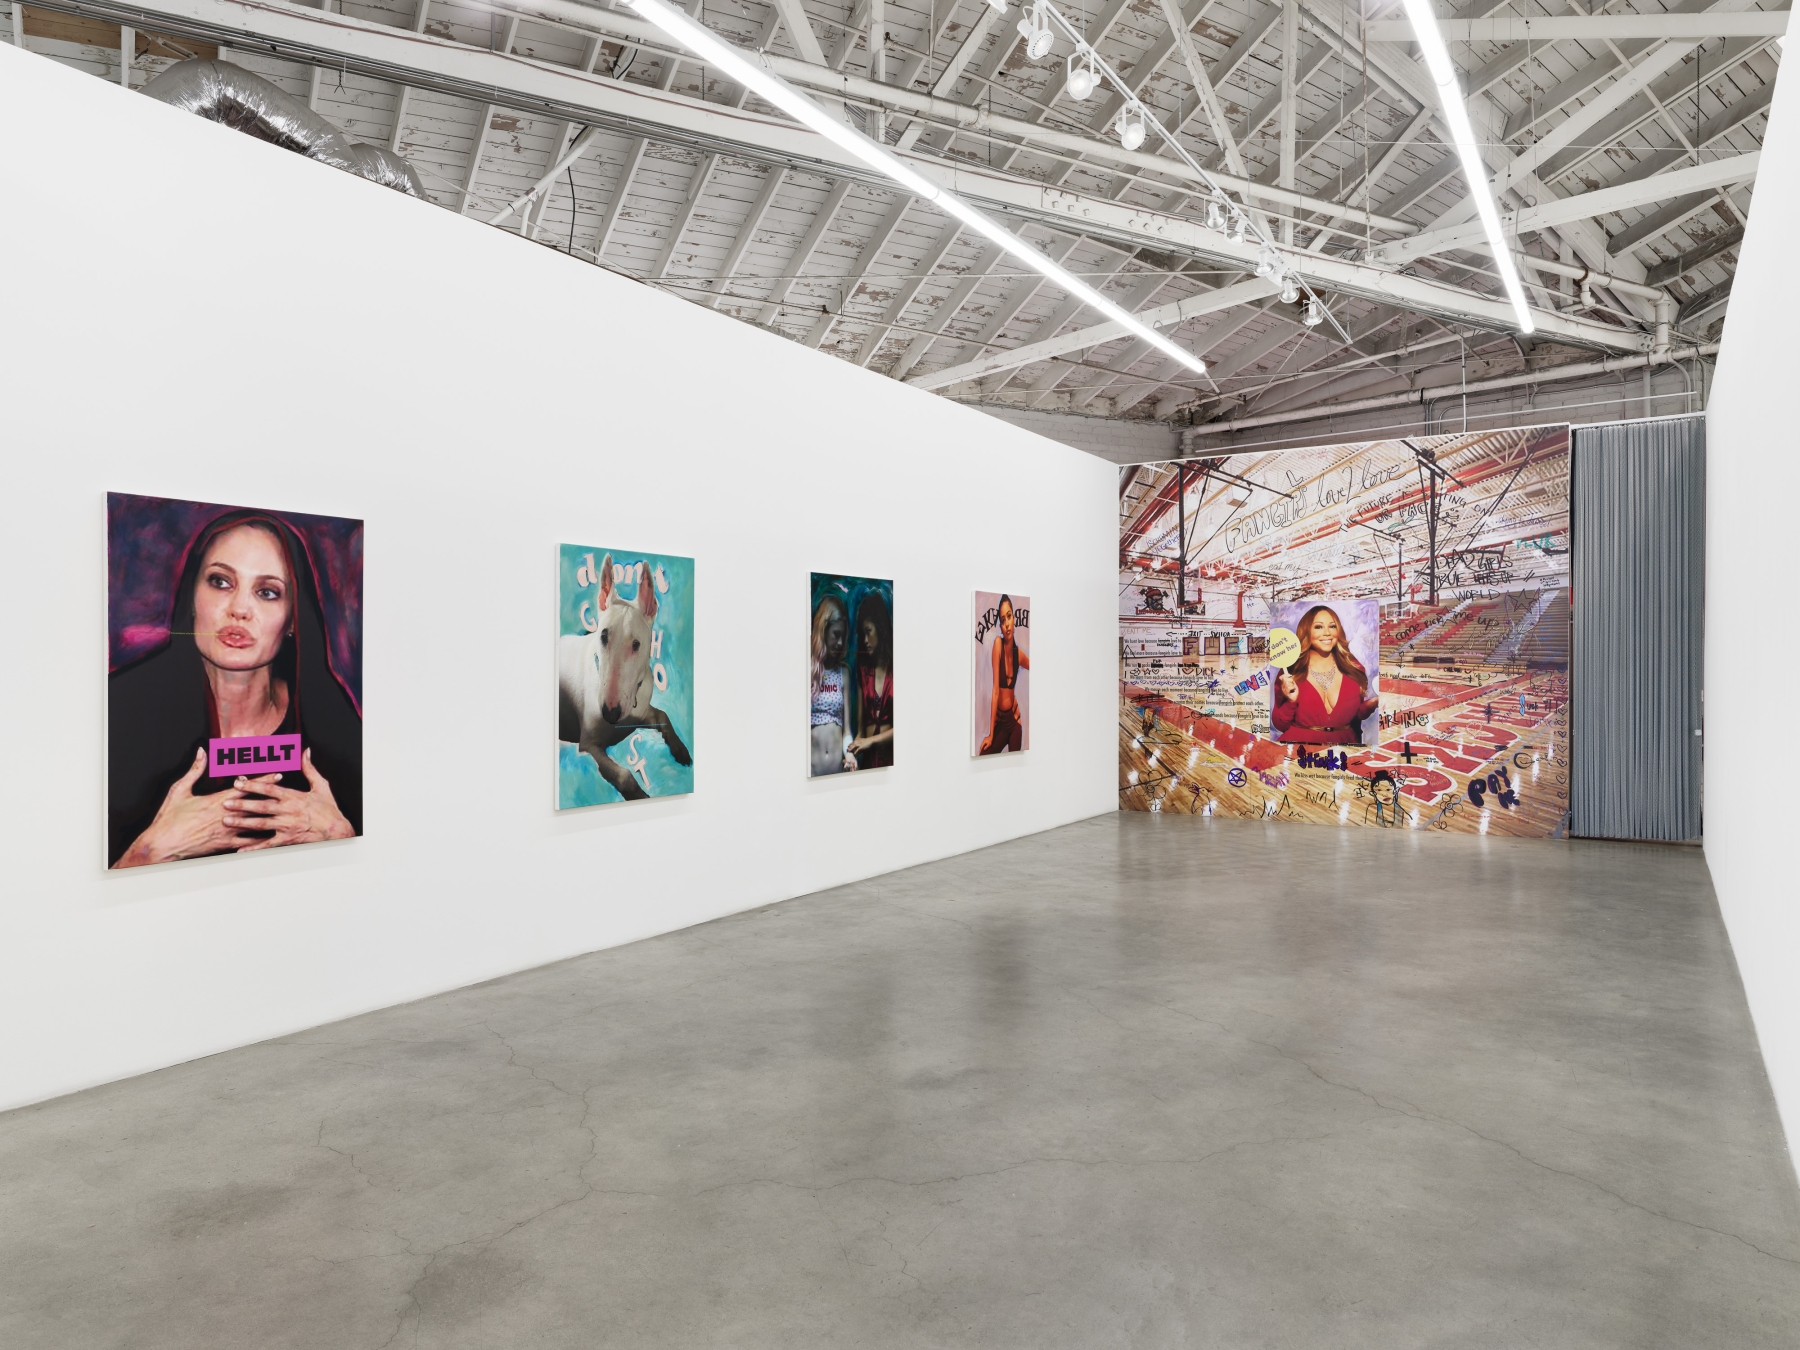 Cara&nbsp;Benedetto, Love You, installation view, 2022